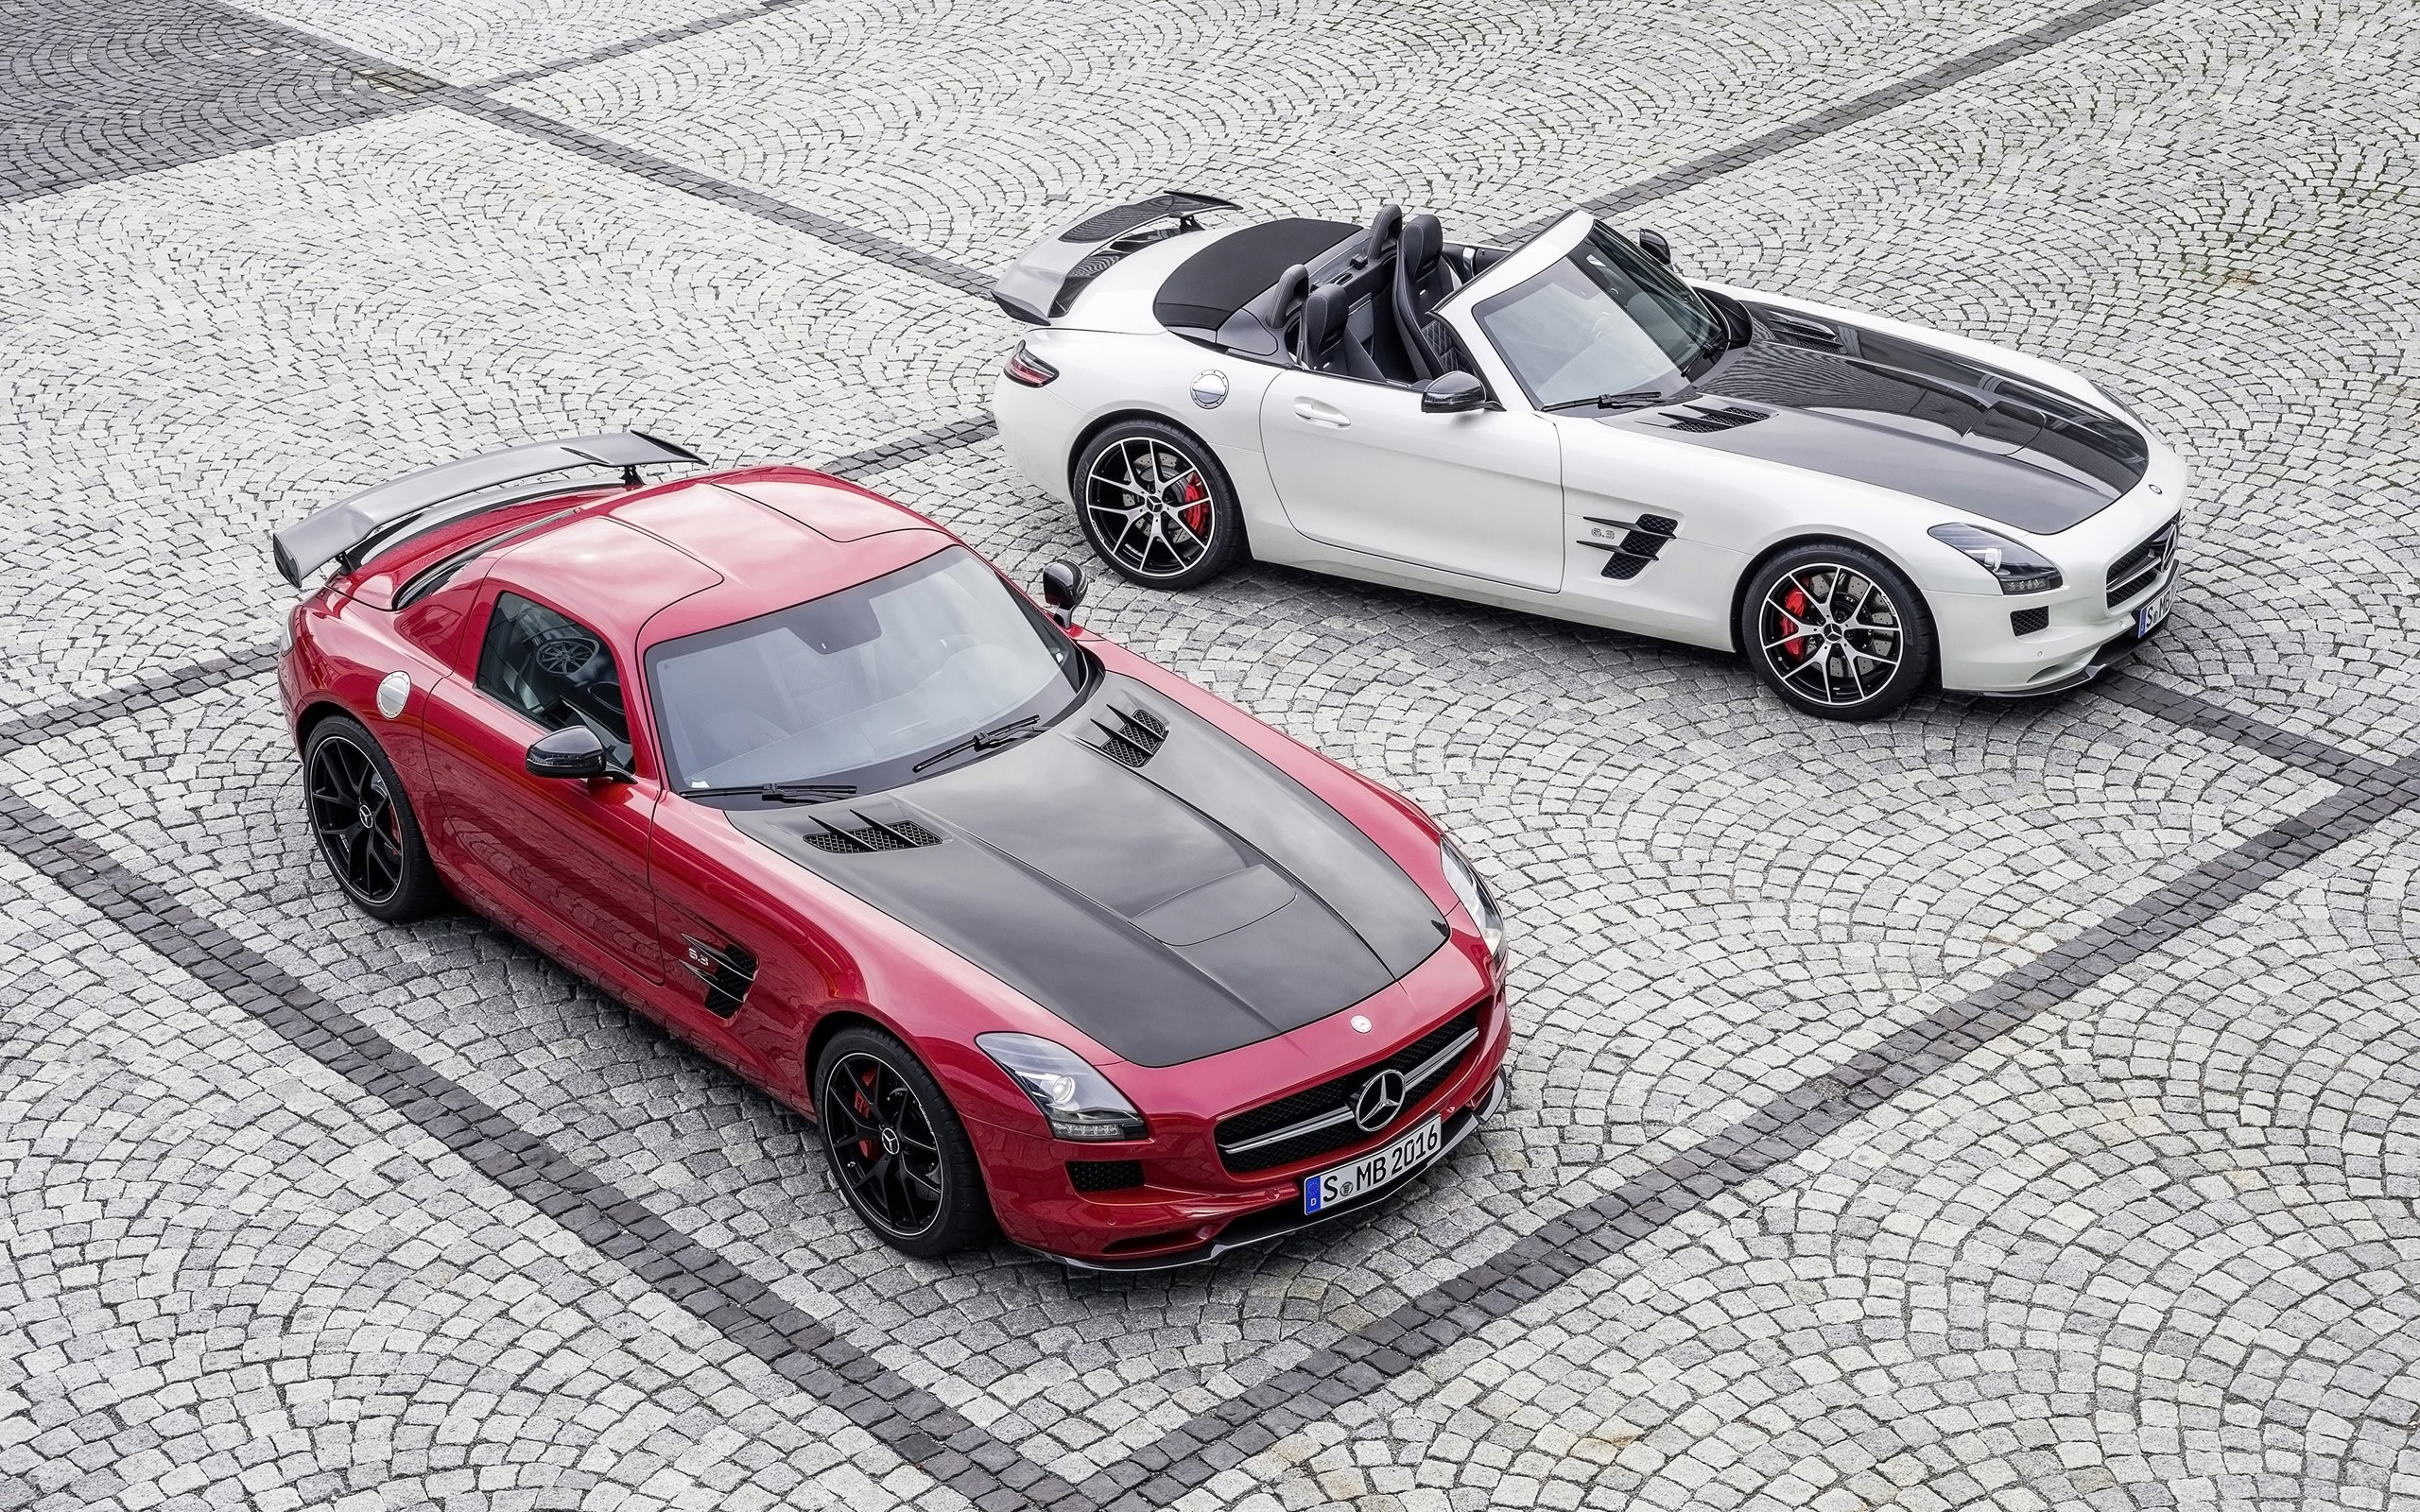 General 2560x1600 car Mercedes-Benz SLS AMG Mercedes-Benz red cars white cars vehicle numbers high angle convertible German cars